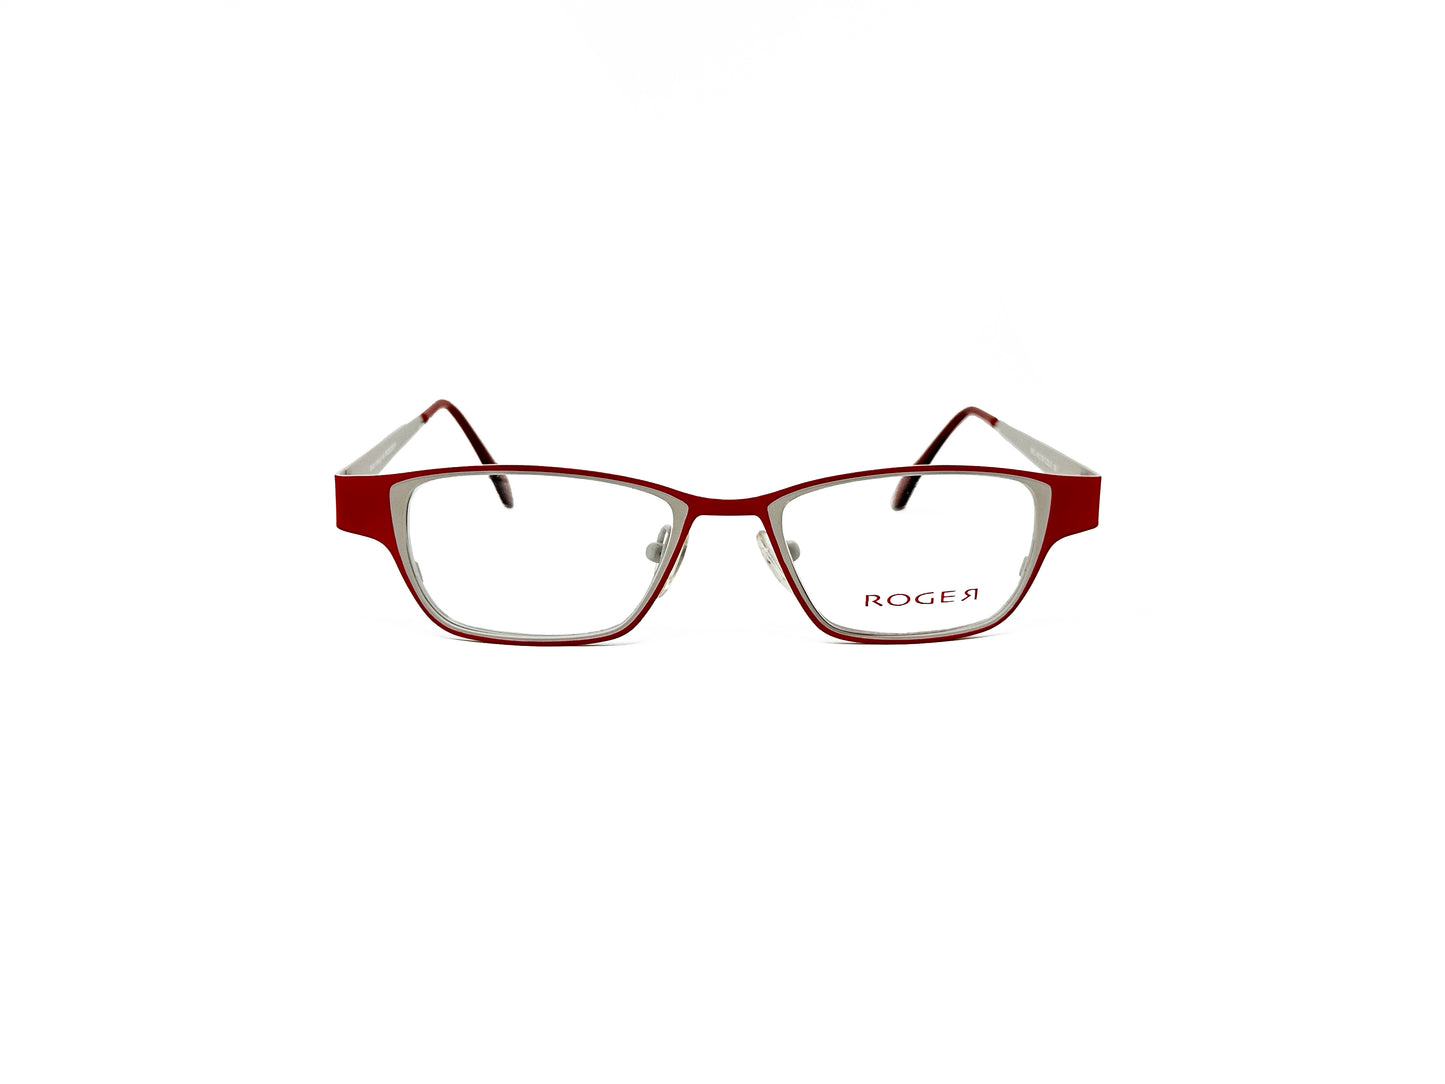 Roger rectangular, metal optical frame. Model: Mel. Color: 3 - Red and white. Front view.